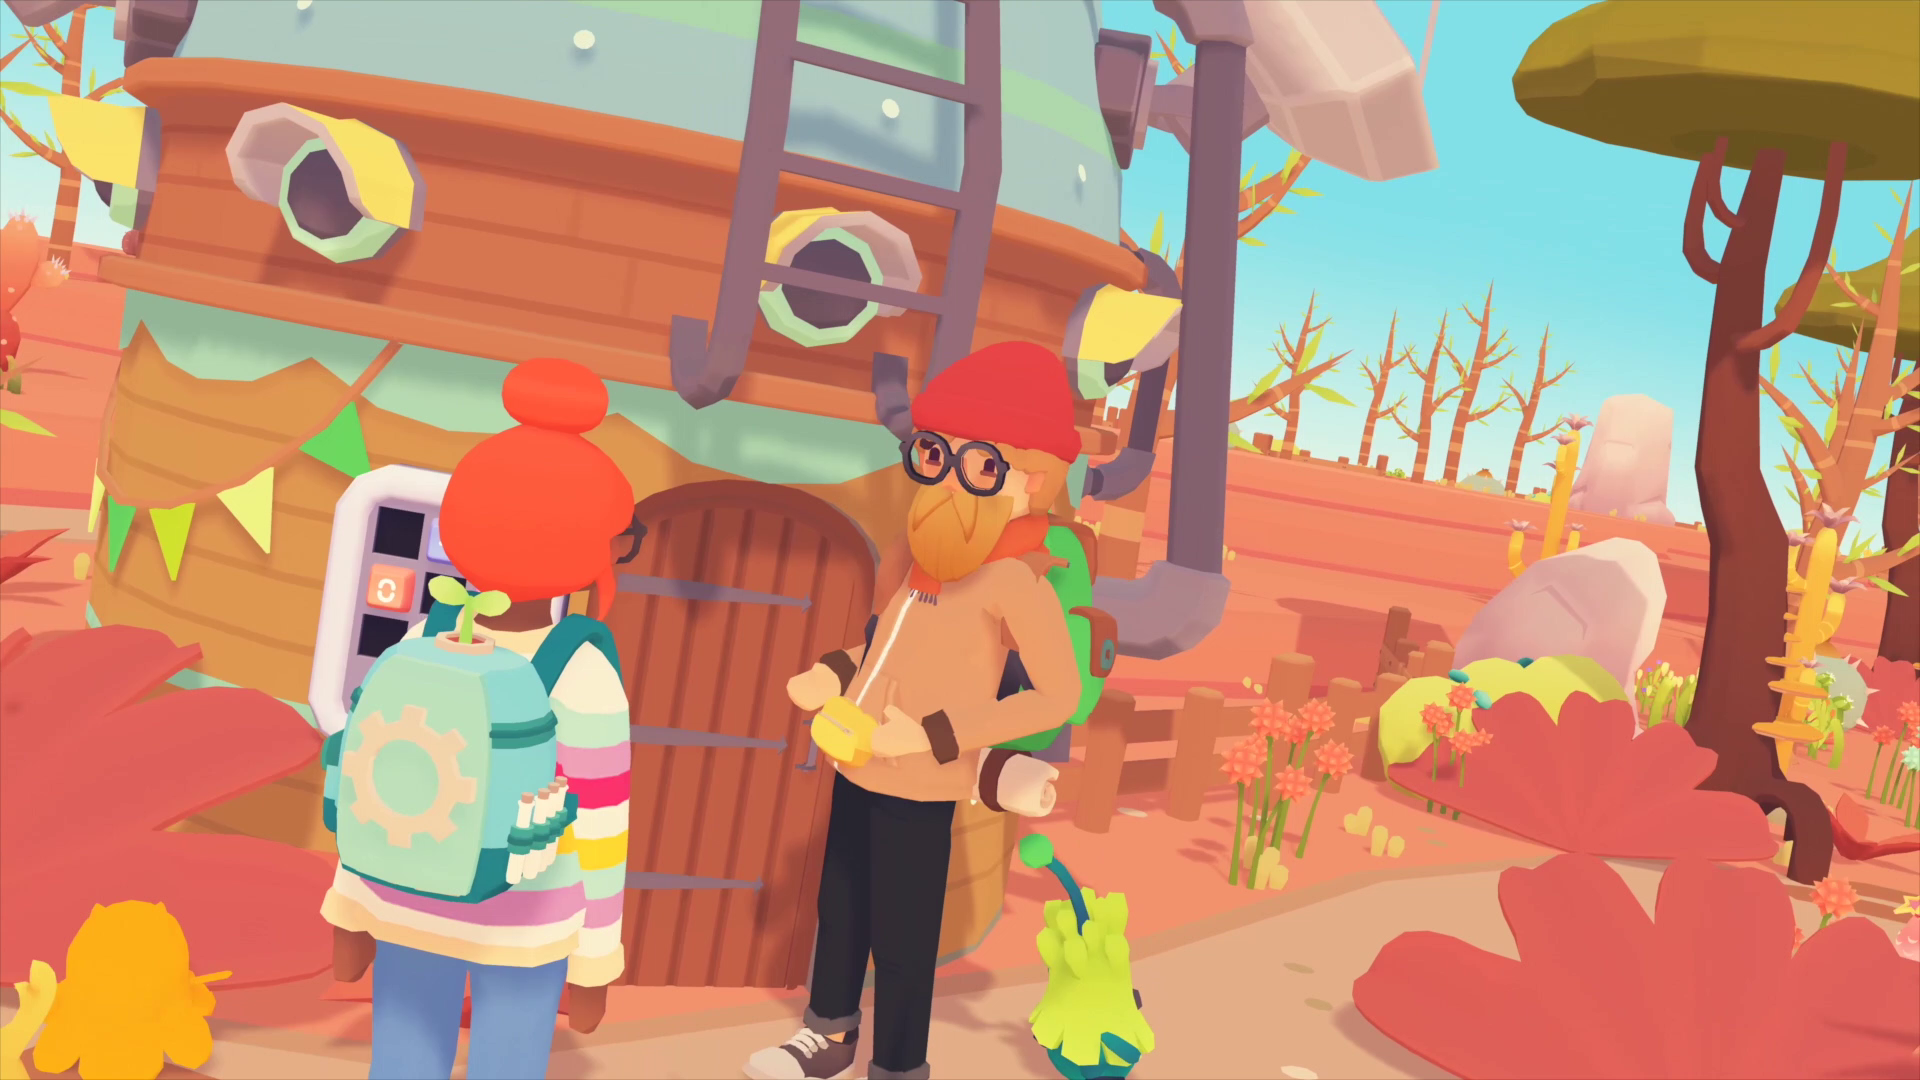 A screenshot from Ooblets early access